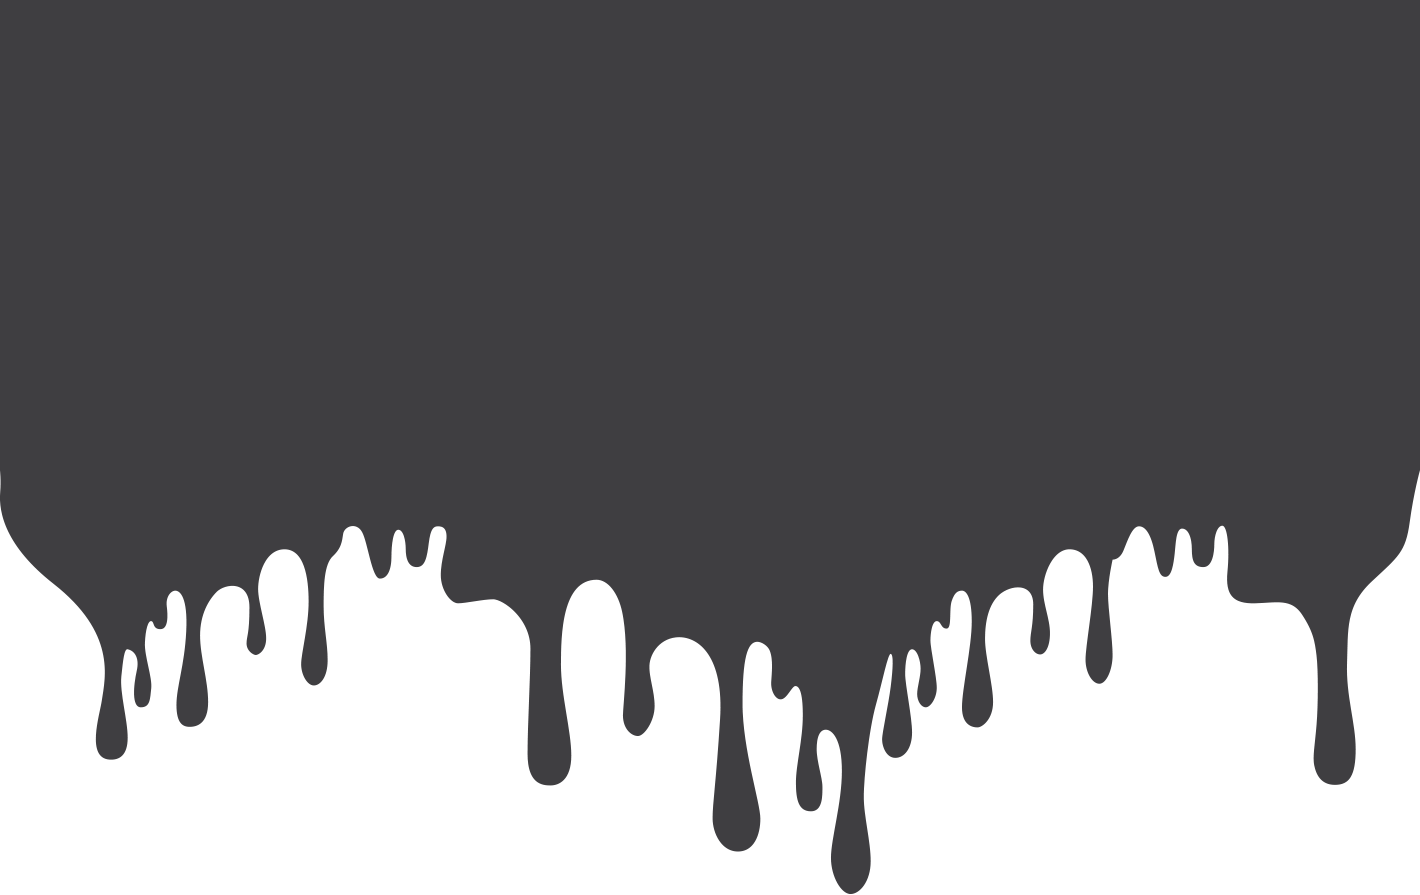 View and Download HD Brush Image Related Wallpaper Paint Drips Png PNG Image for free. The image resolutio. Drip painting, Black paint, Digital art anime